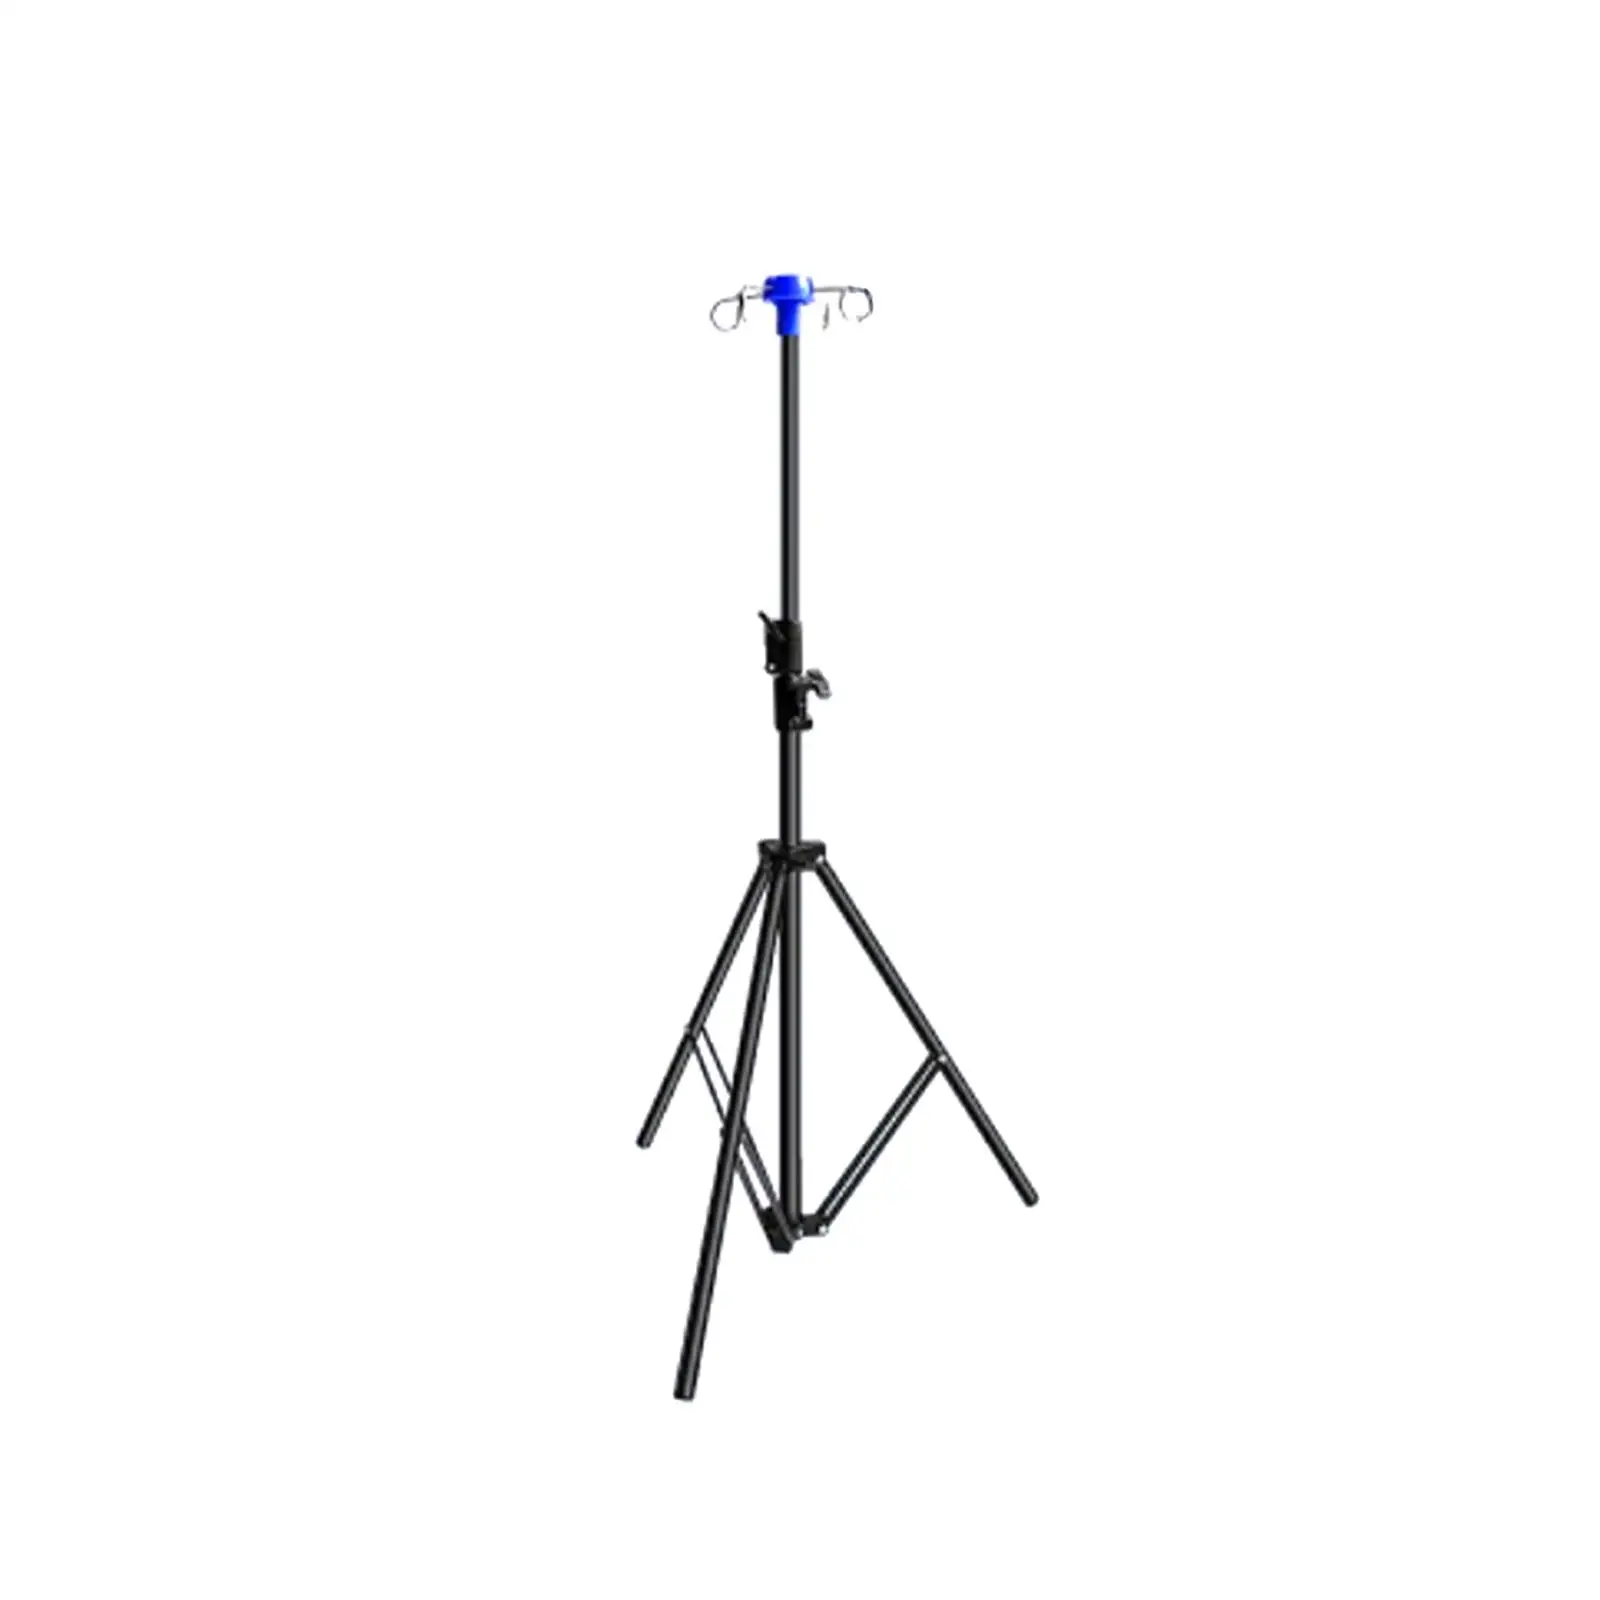 IV Poles Stand 75cm-210cm Adjustable Infusion Stand for Communities Families